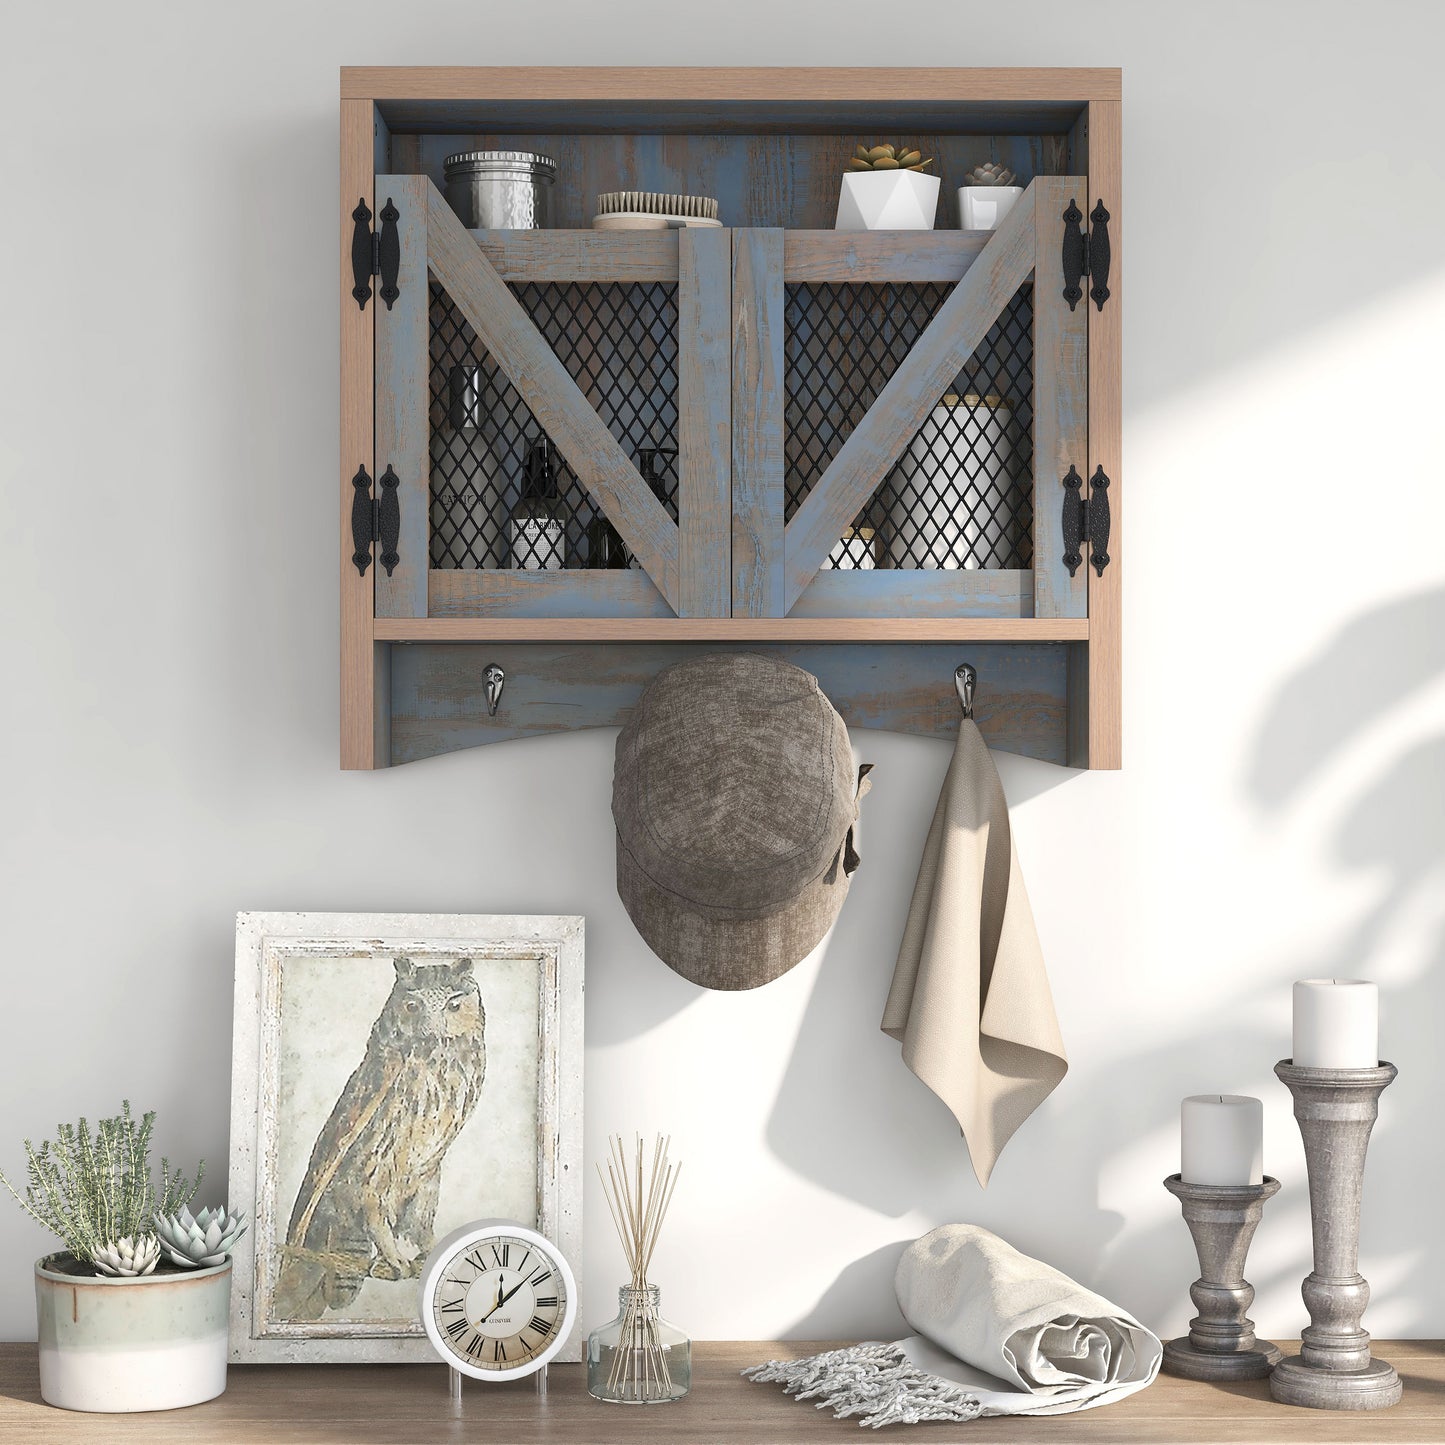 Front-facing farmhouse distressed blue wood two-door wall organizer in an entryway with accessories